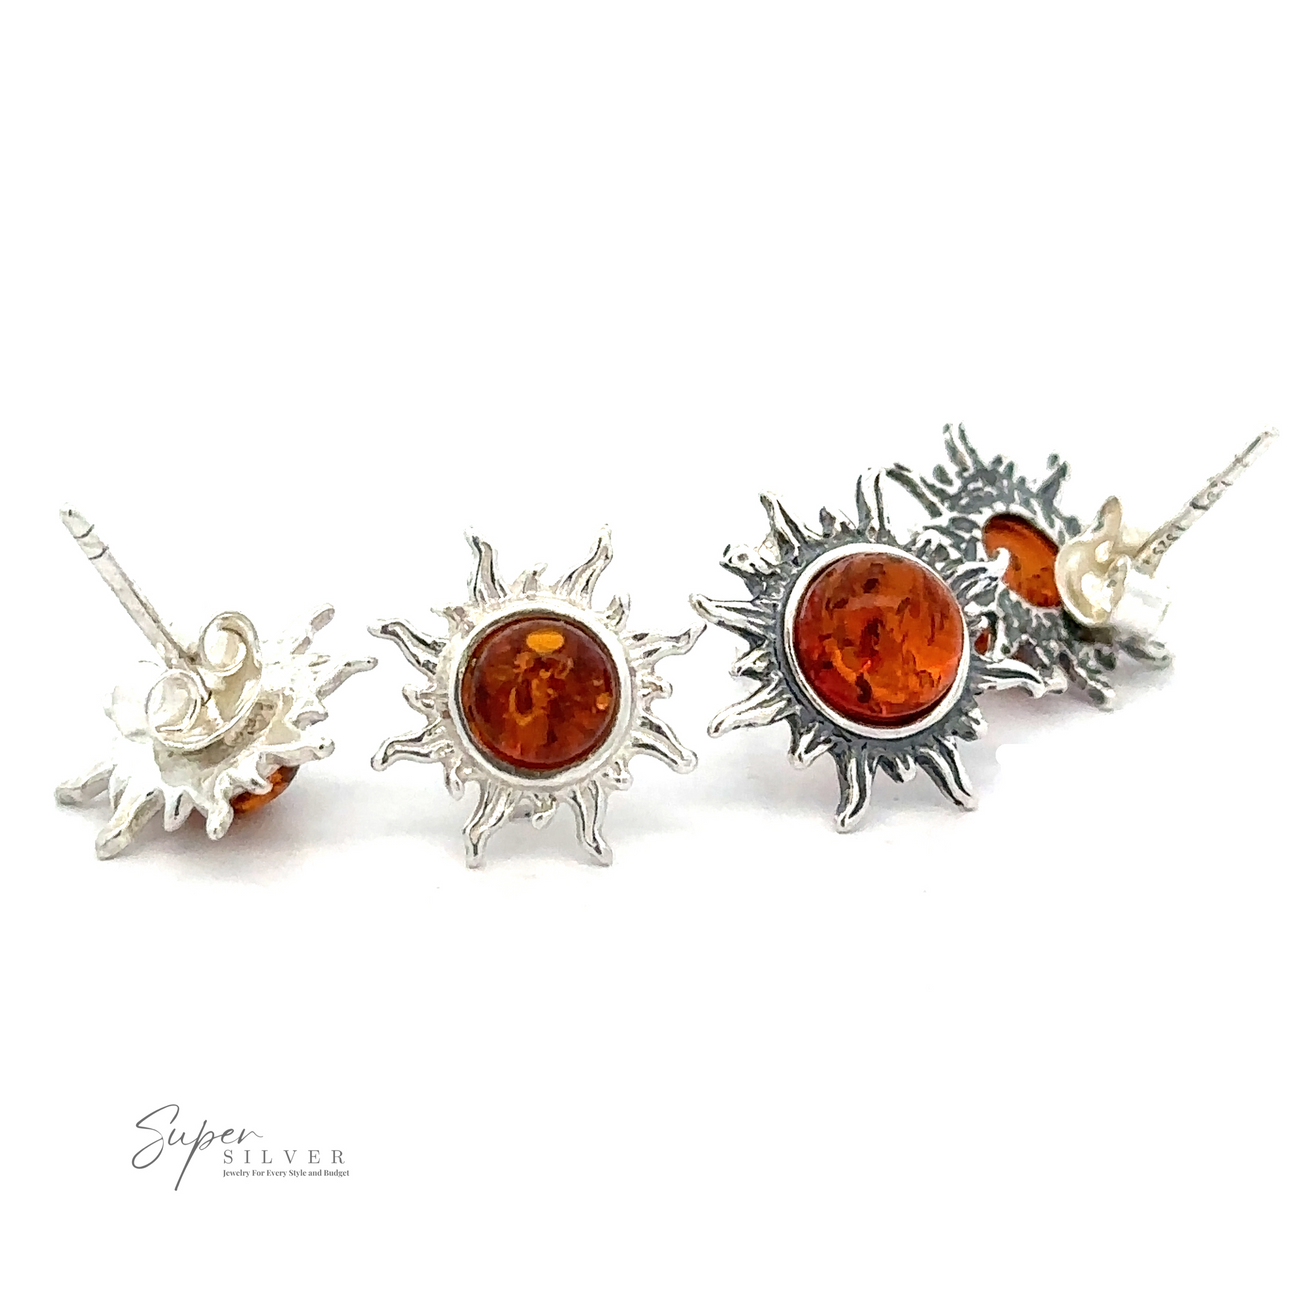 Four silver Brilliant Amber Sun Stud Earrings with Baltic amber stones in the center are displayed on a white background. The logo "Super Silver" is visible in the bottom left corner.